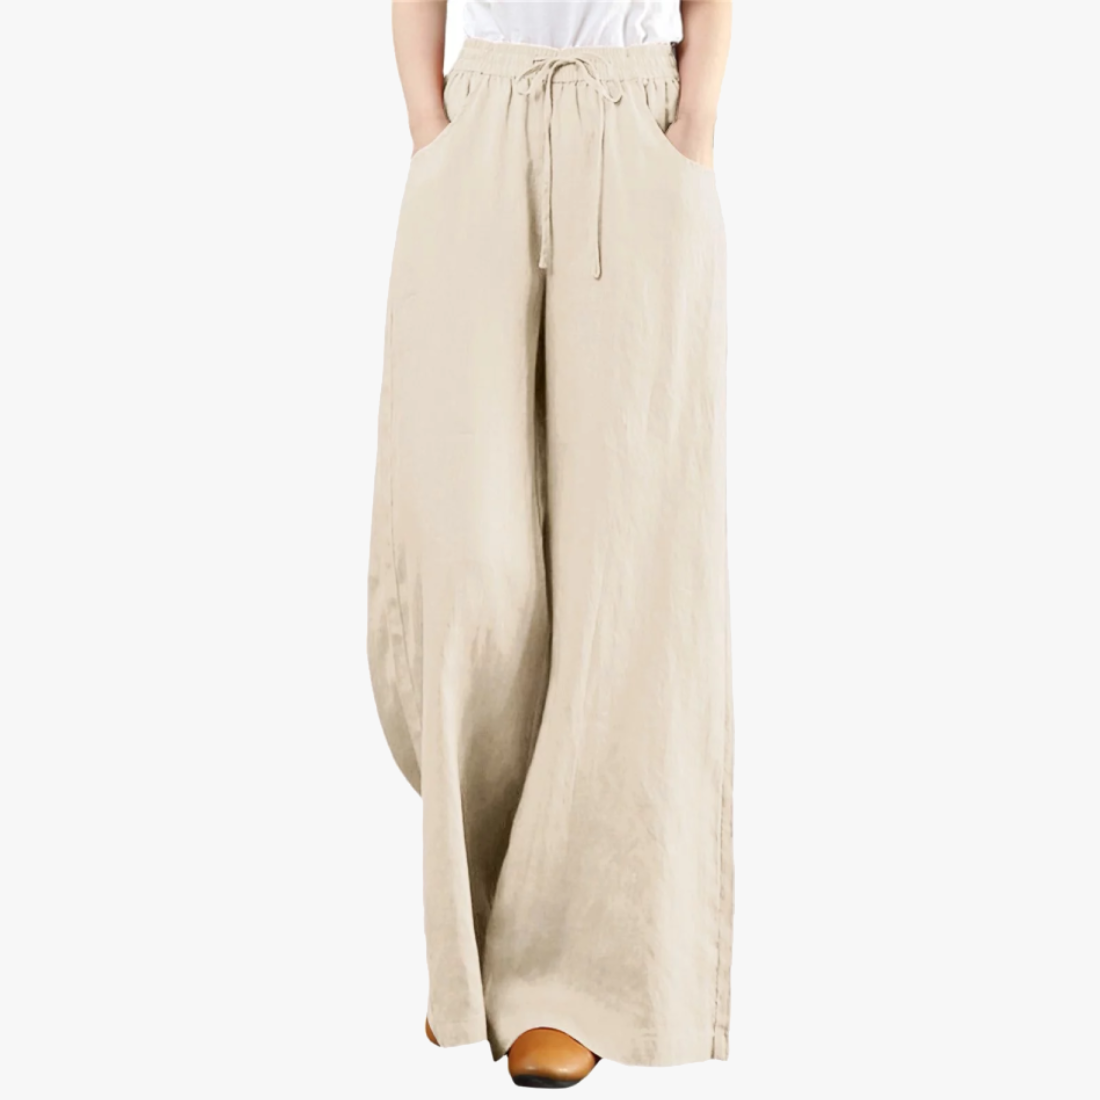 ST.CHRISTINA COTTON WIDE LEG WHOLESALE WOMEN SUMMER PANTS ASSORTED COLORS SMALL/MEDIUM AND LARGE/XL